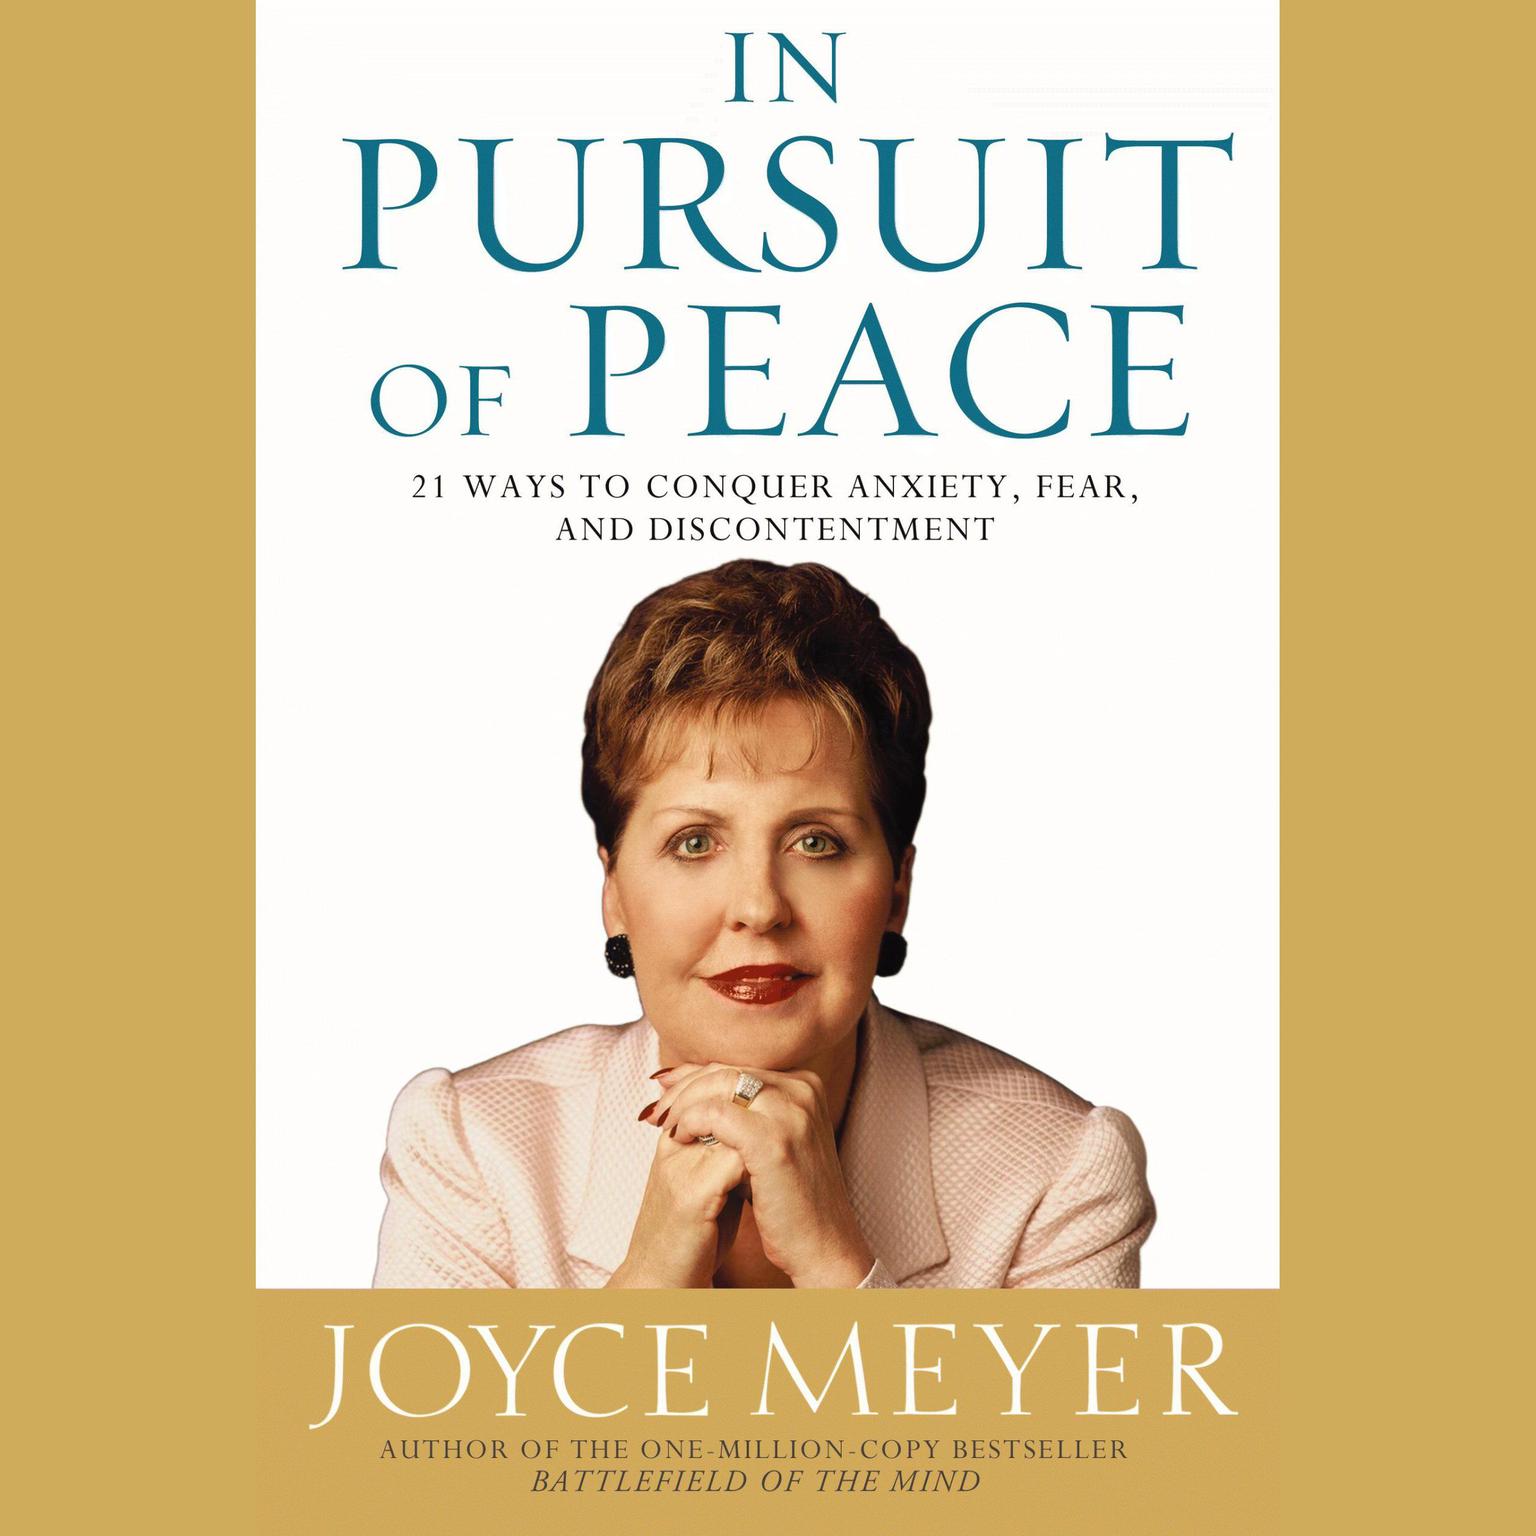 In Pursuit of Peace (Abridged): 21 Ways to Conquer Anxiety, Fear, and Discontentment Audiobook, by Joyce Meyer